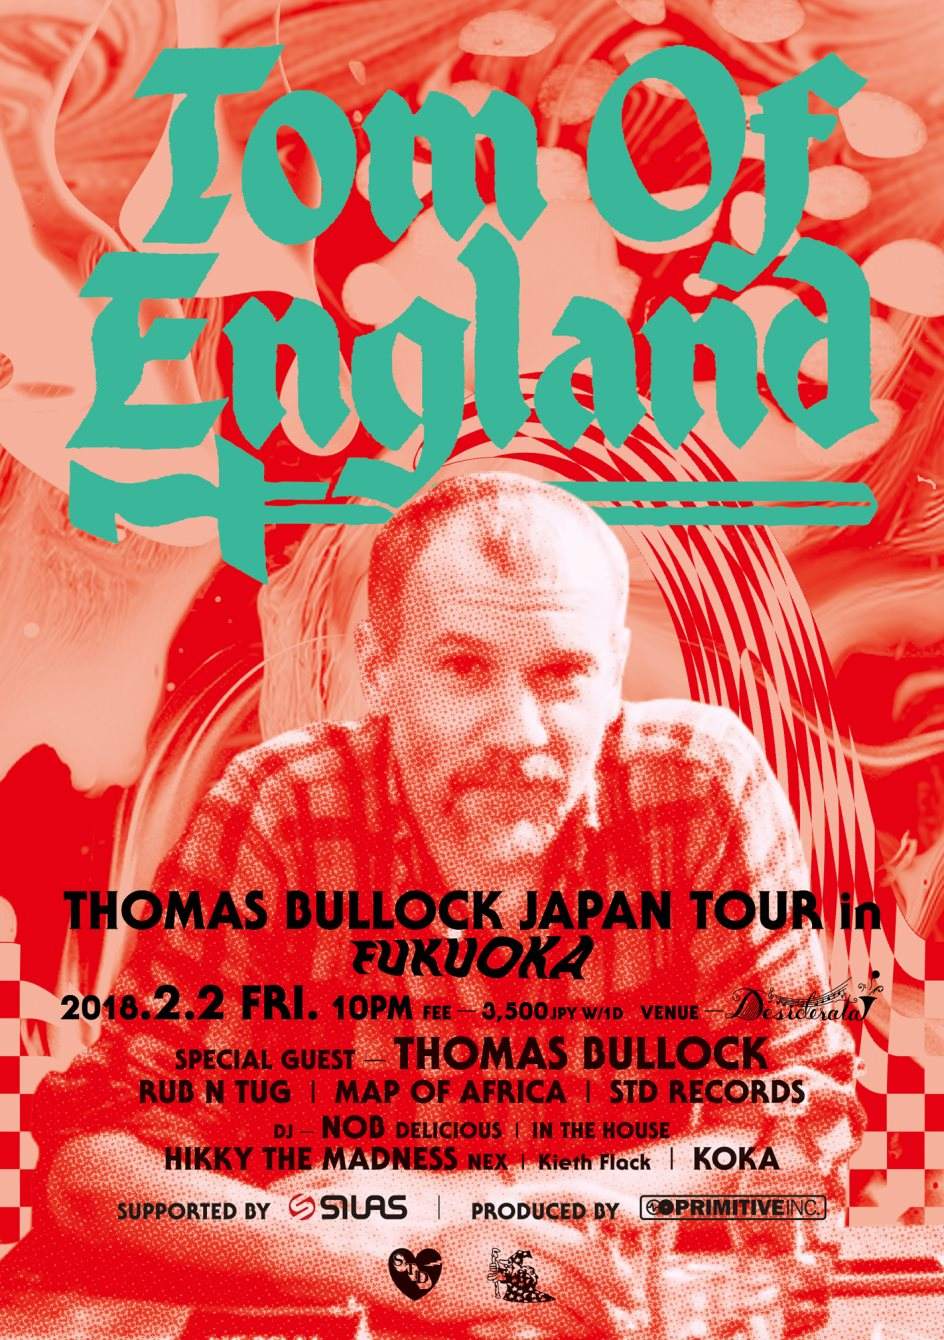 Tom of England aka Thomas Bullock Japan Tour Supported by Silas Produced by Primitive INC - フライヤー表